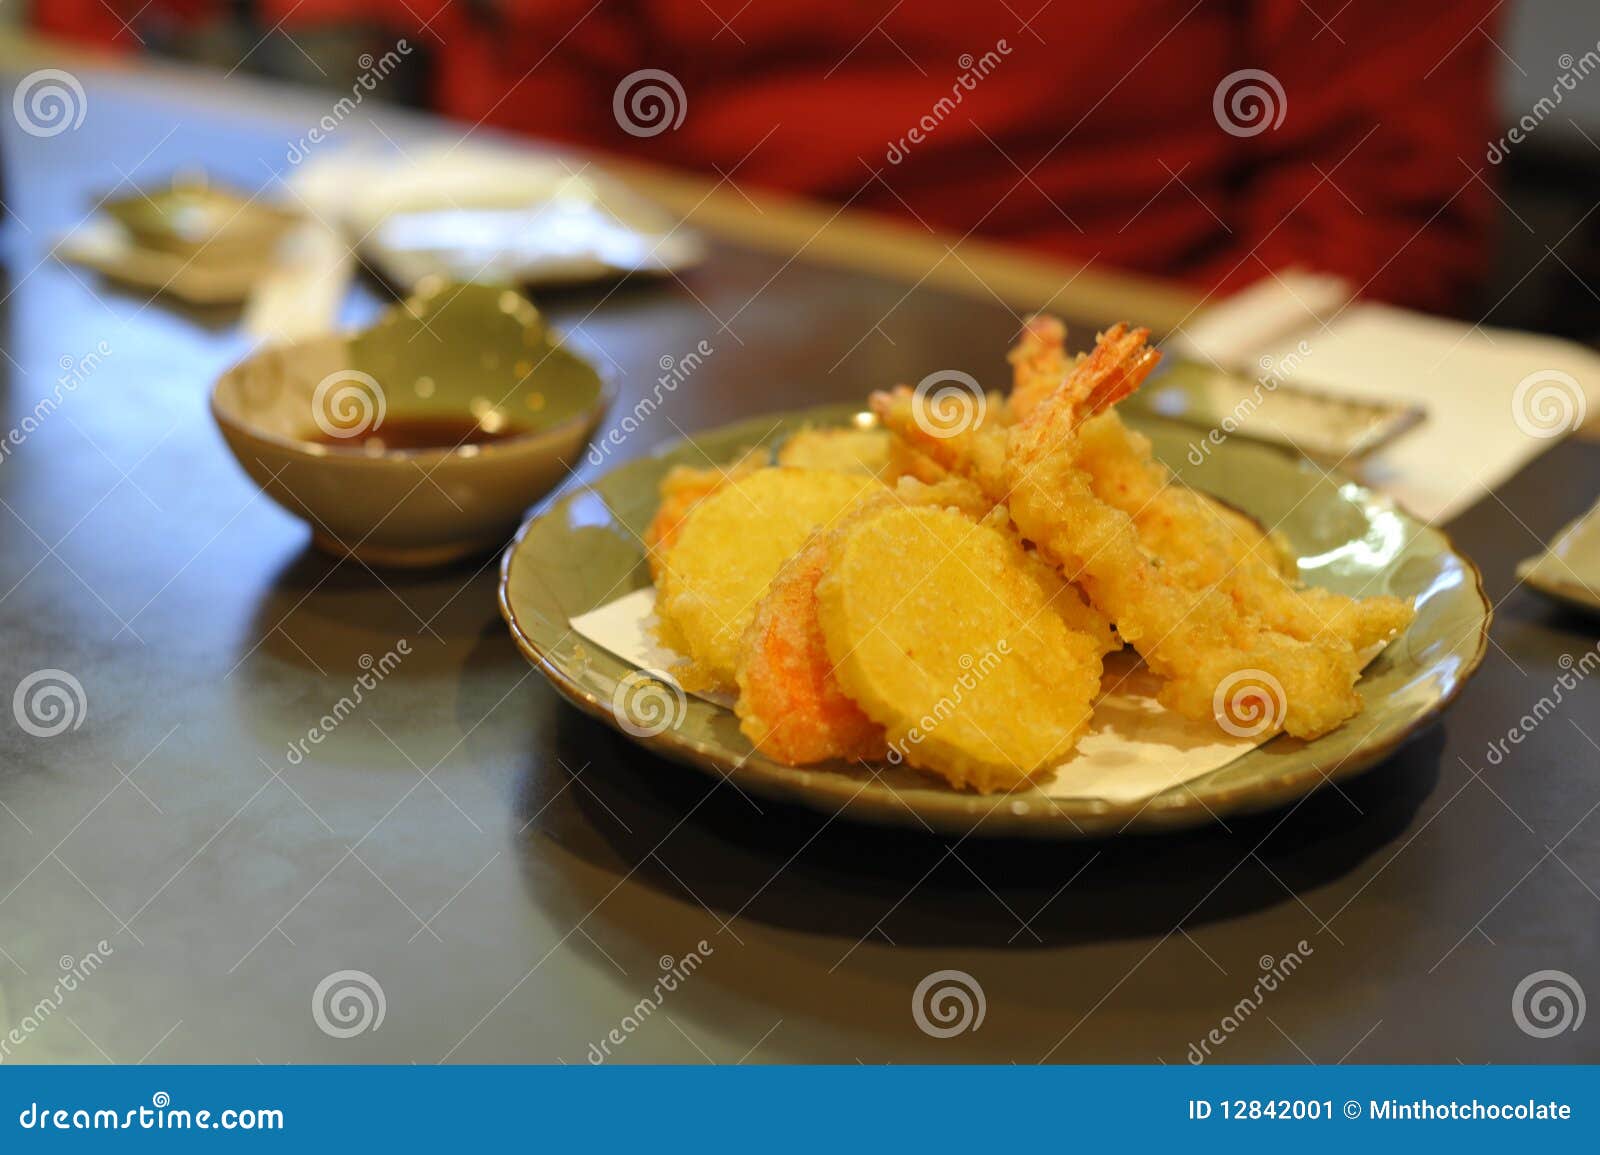 Vegetable and Shrimp Tempura Stock Image - Image of calorie, healthy ...